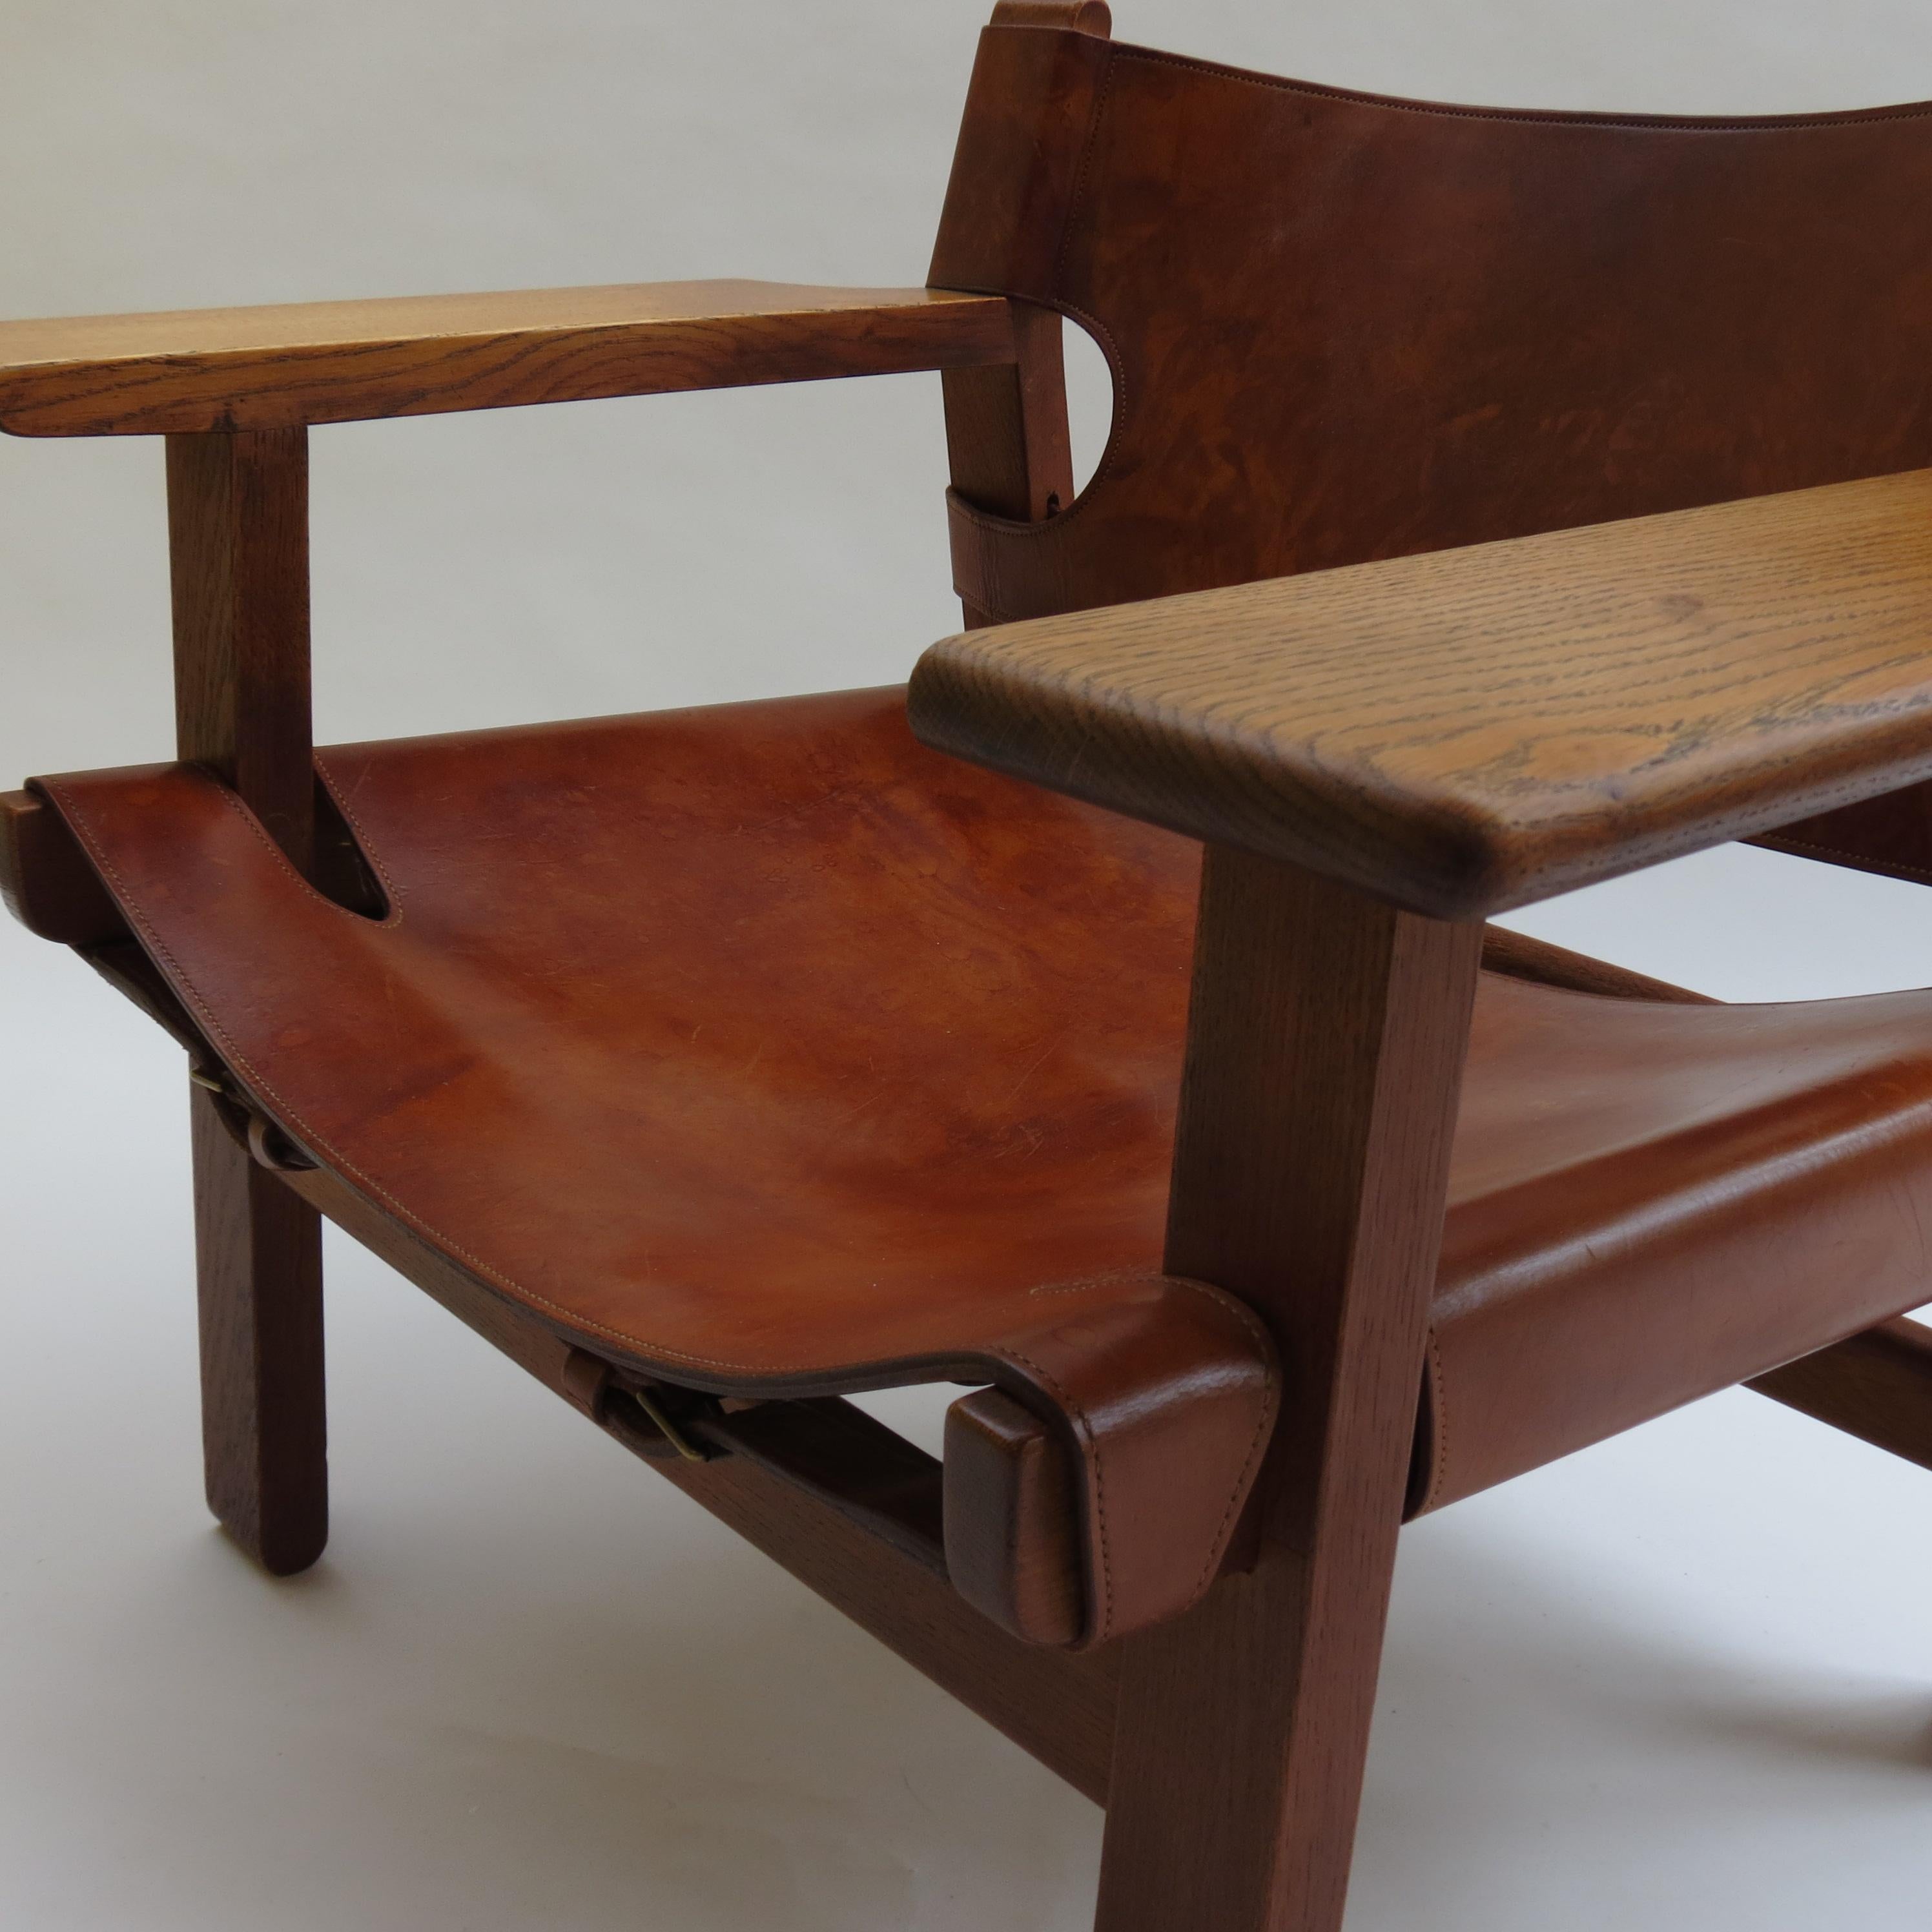 This is an early original Spanish chair by Borge Mogensen, Denmark. This is an early example with stitching detail to the leather back panel on the outer edge.

The chair is wonderfully patinated, the oak frame is a wonderful rich color and the